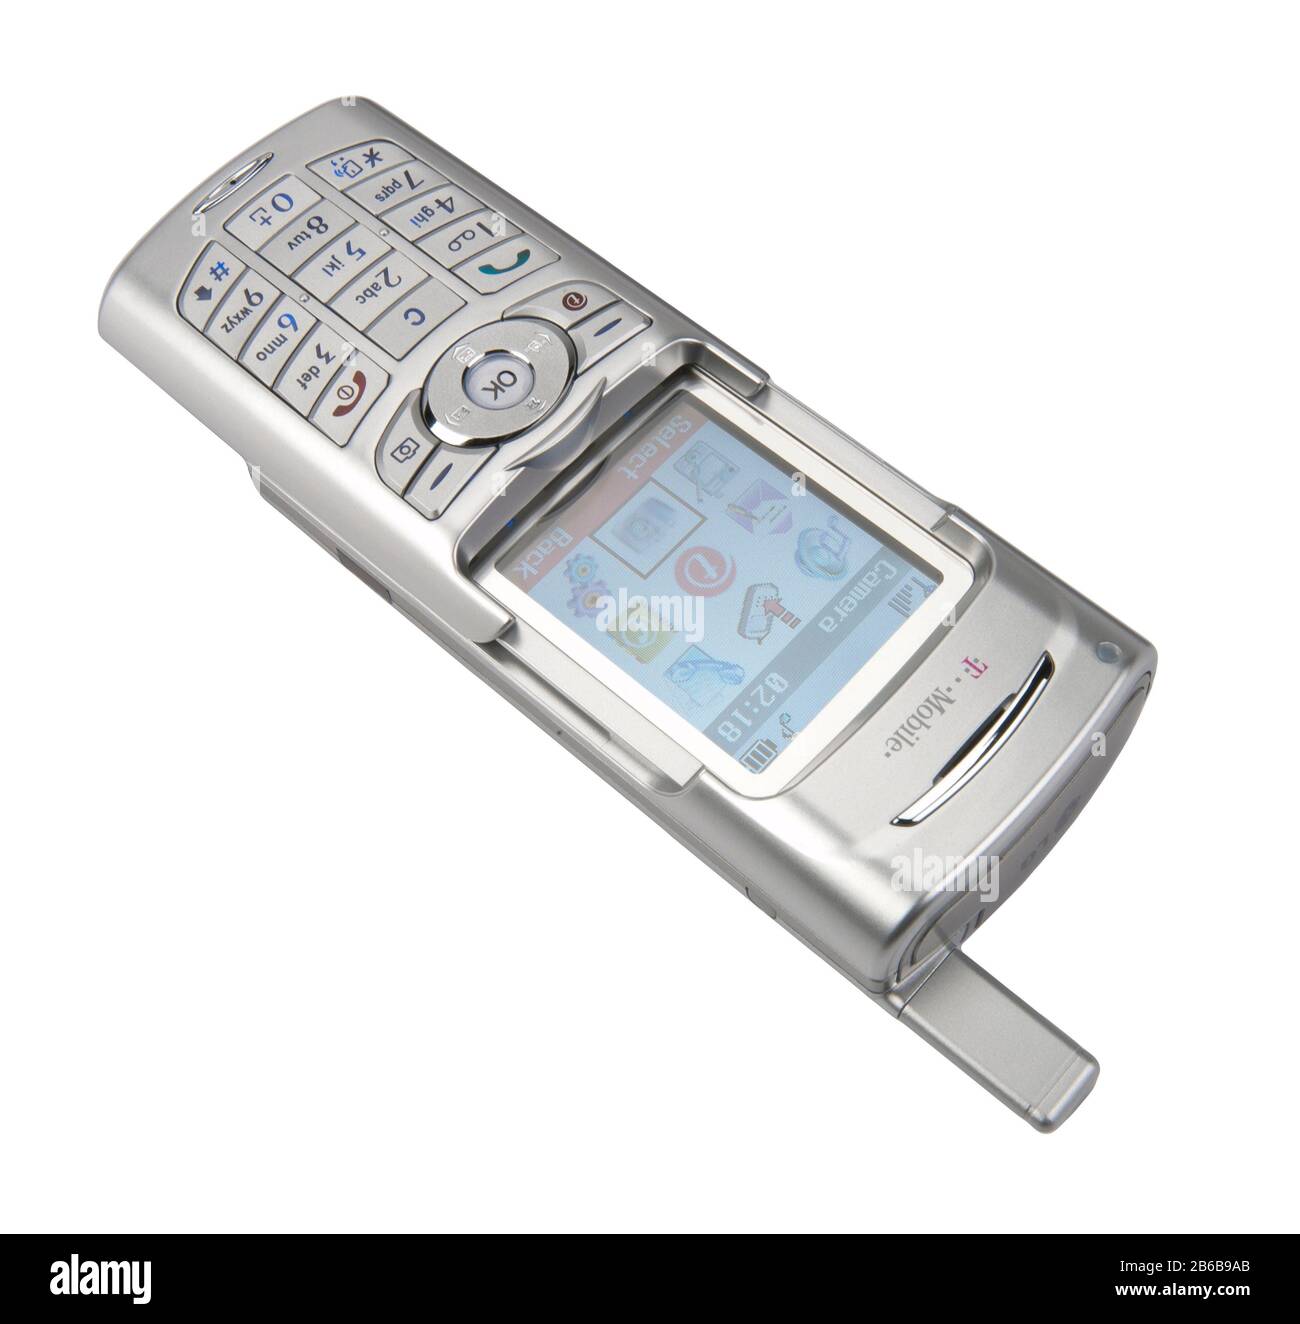 Old style 1990's mobile phone. LG Mobile telephone with colour screen on T mobile. Stock Photo